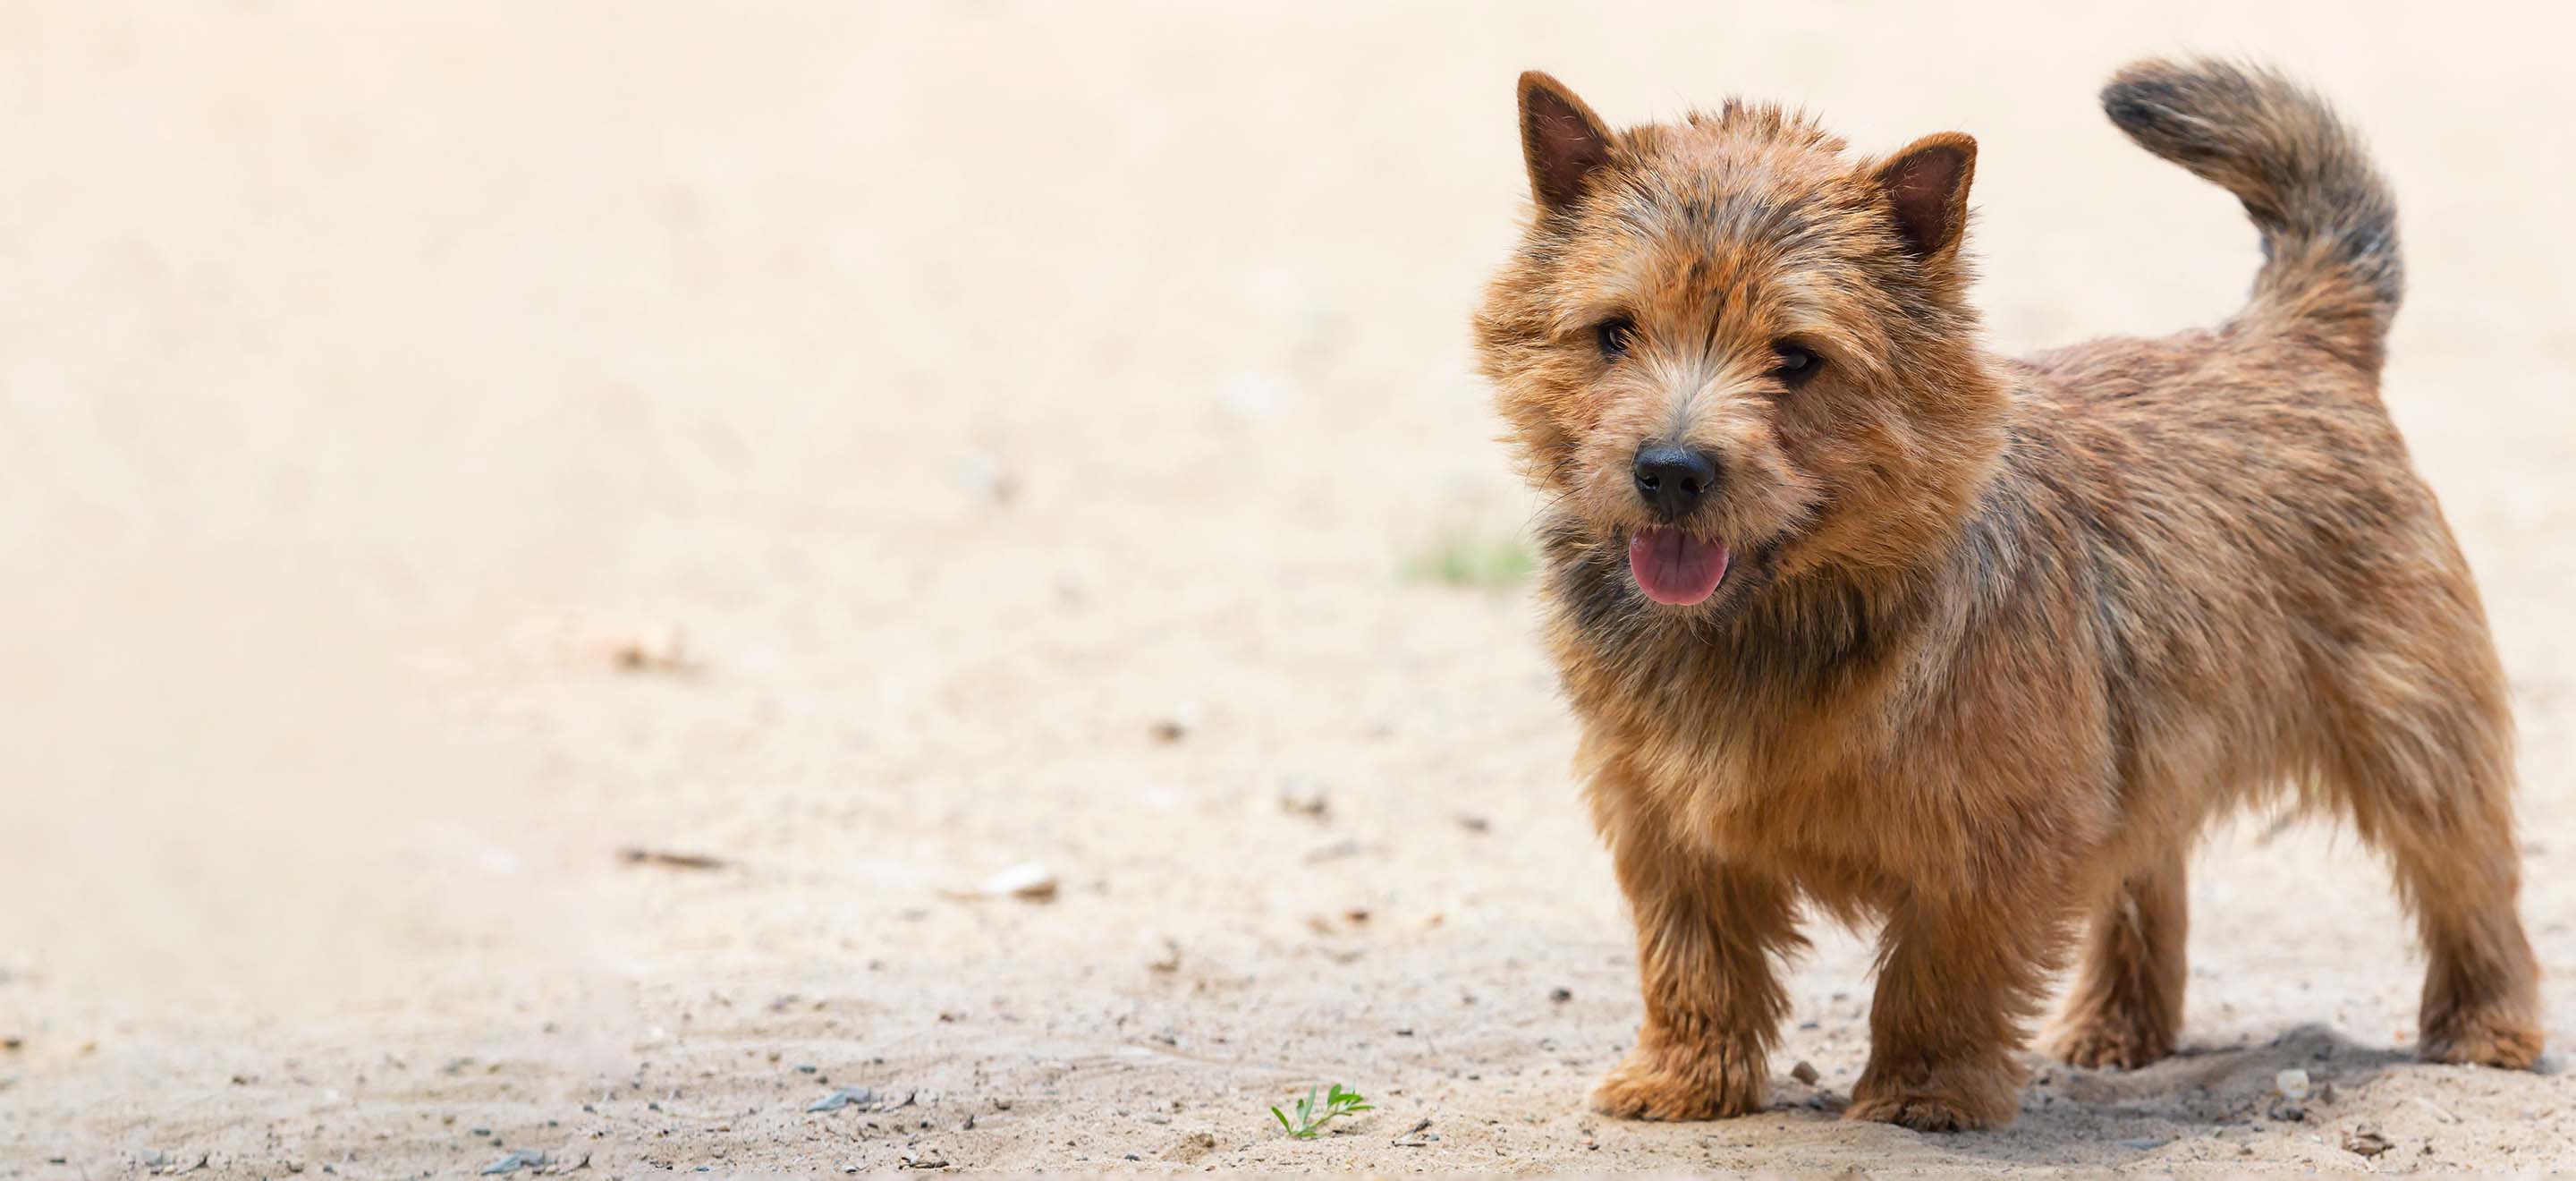 Norwich Terrier dog standing on a sandy gravel road image